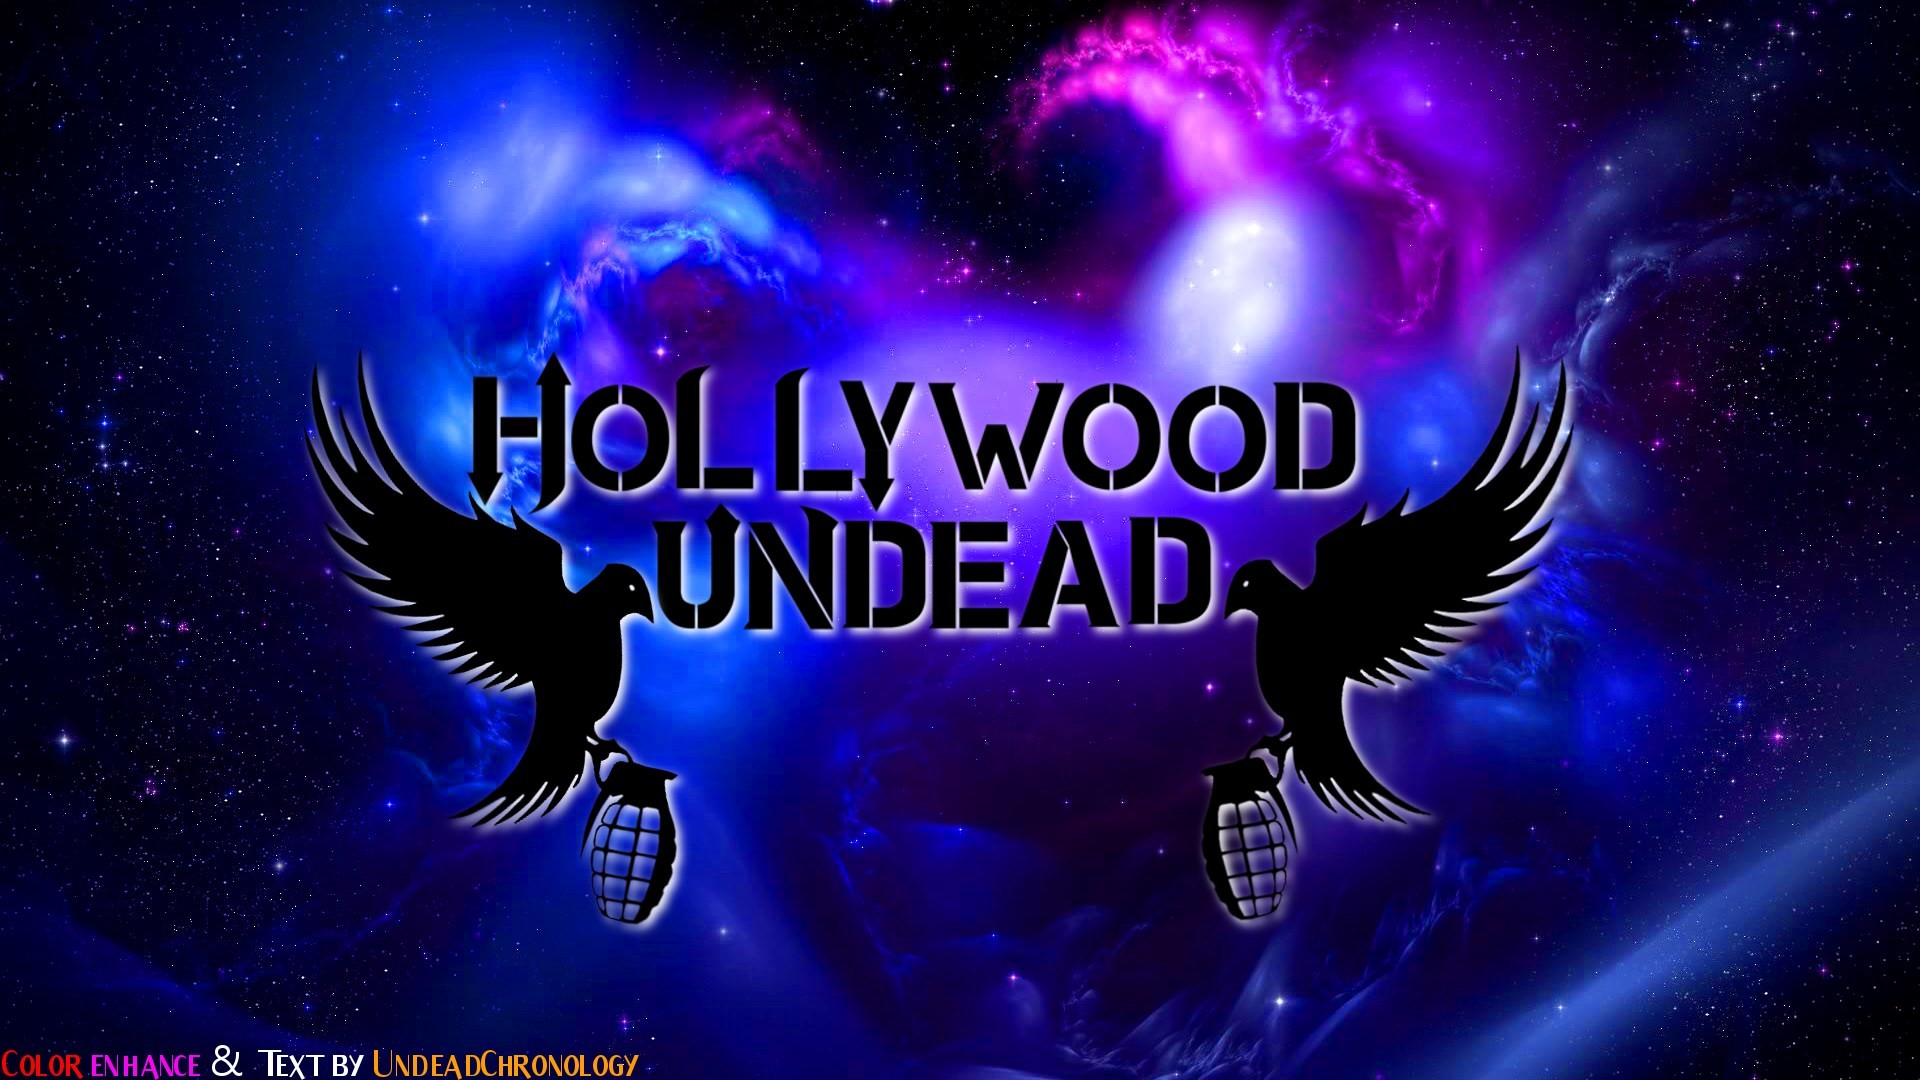 1920x1080 ... Cool Hollywood Undead Wallpaper Free Wallpaper For Desktop and Mobile  in All Resolutions Free Download Best